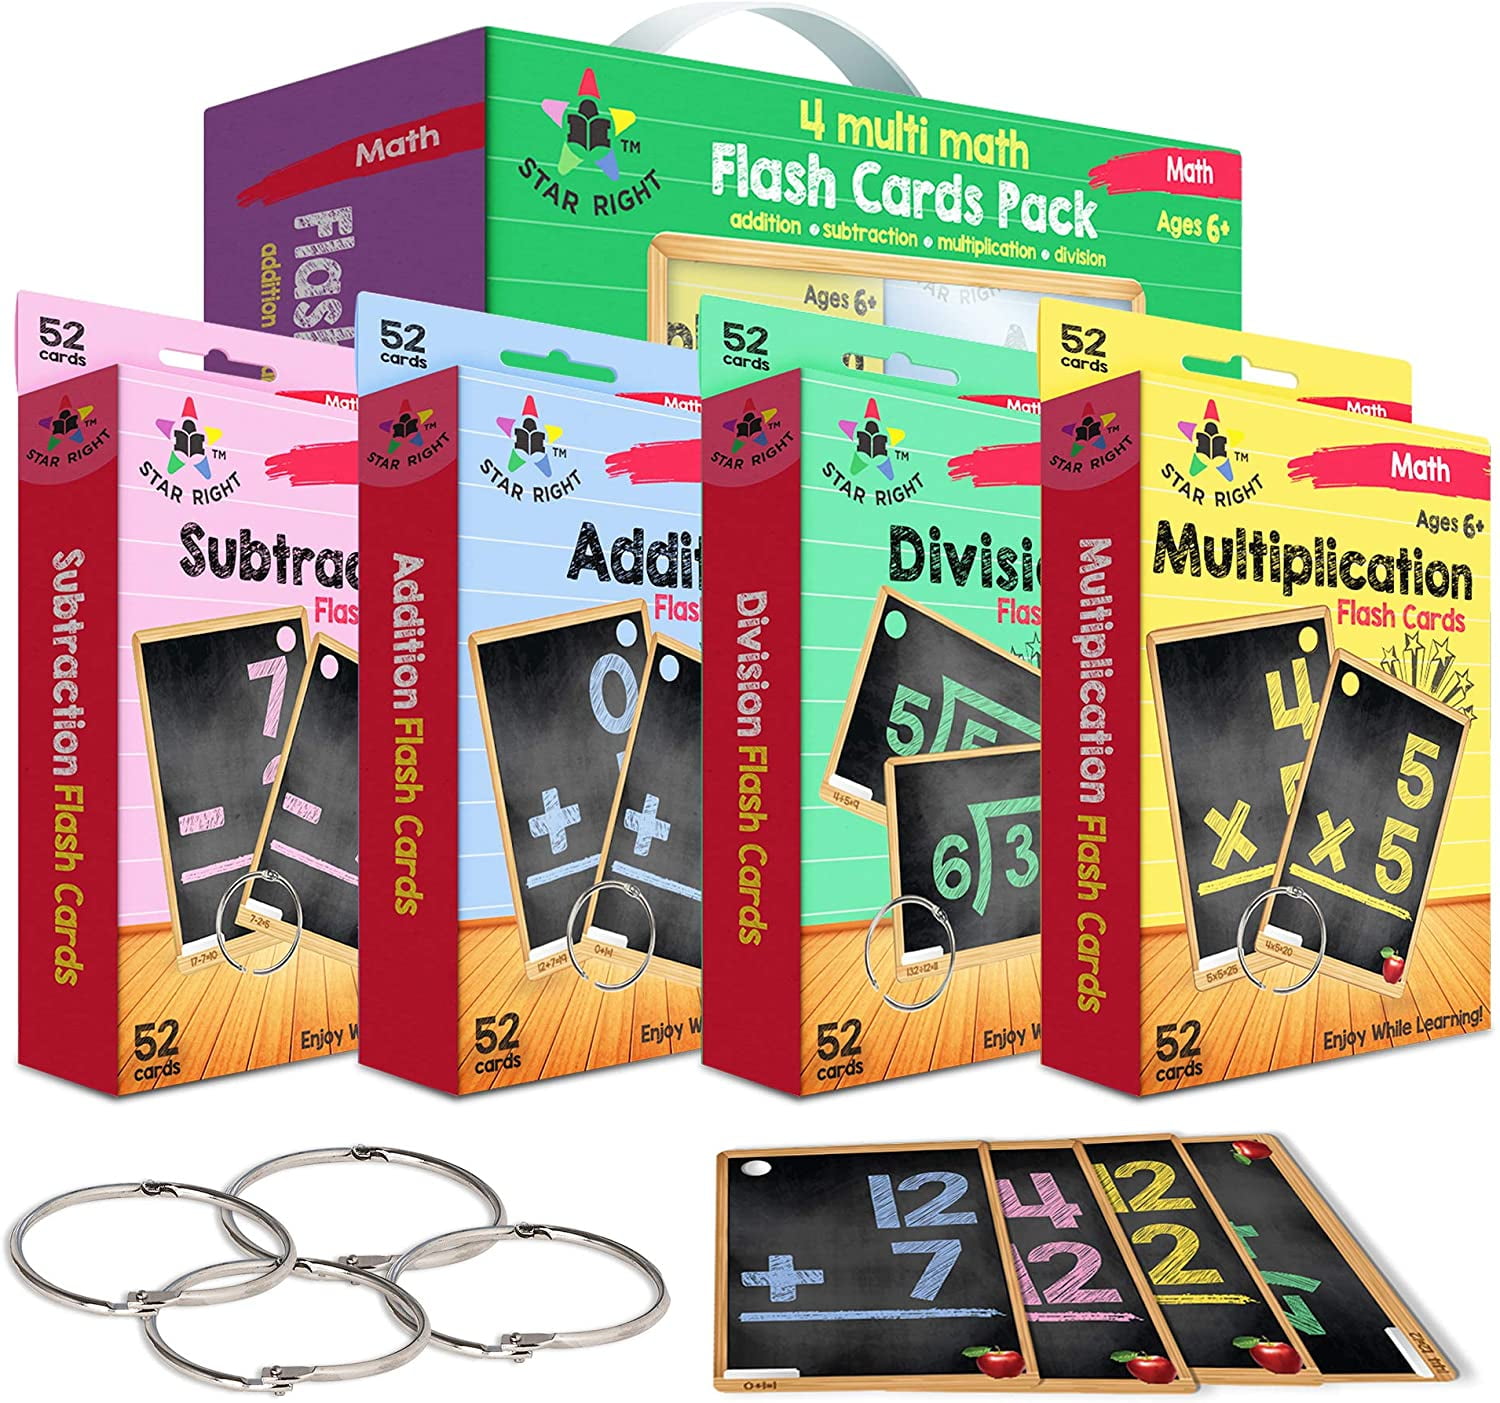 325 Self Checking Flashcards Star Right Division and Multiplication Flashcards with 8 Metal Binder Rings for Ages 6 and Up 